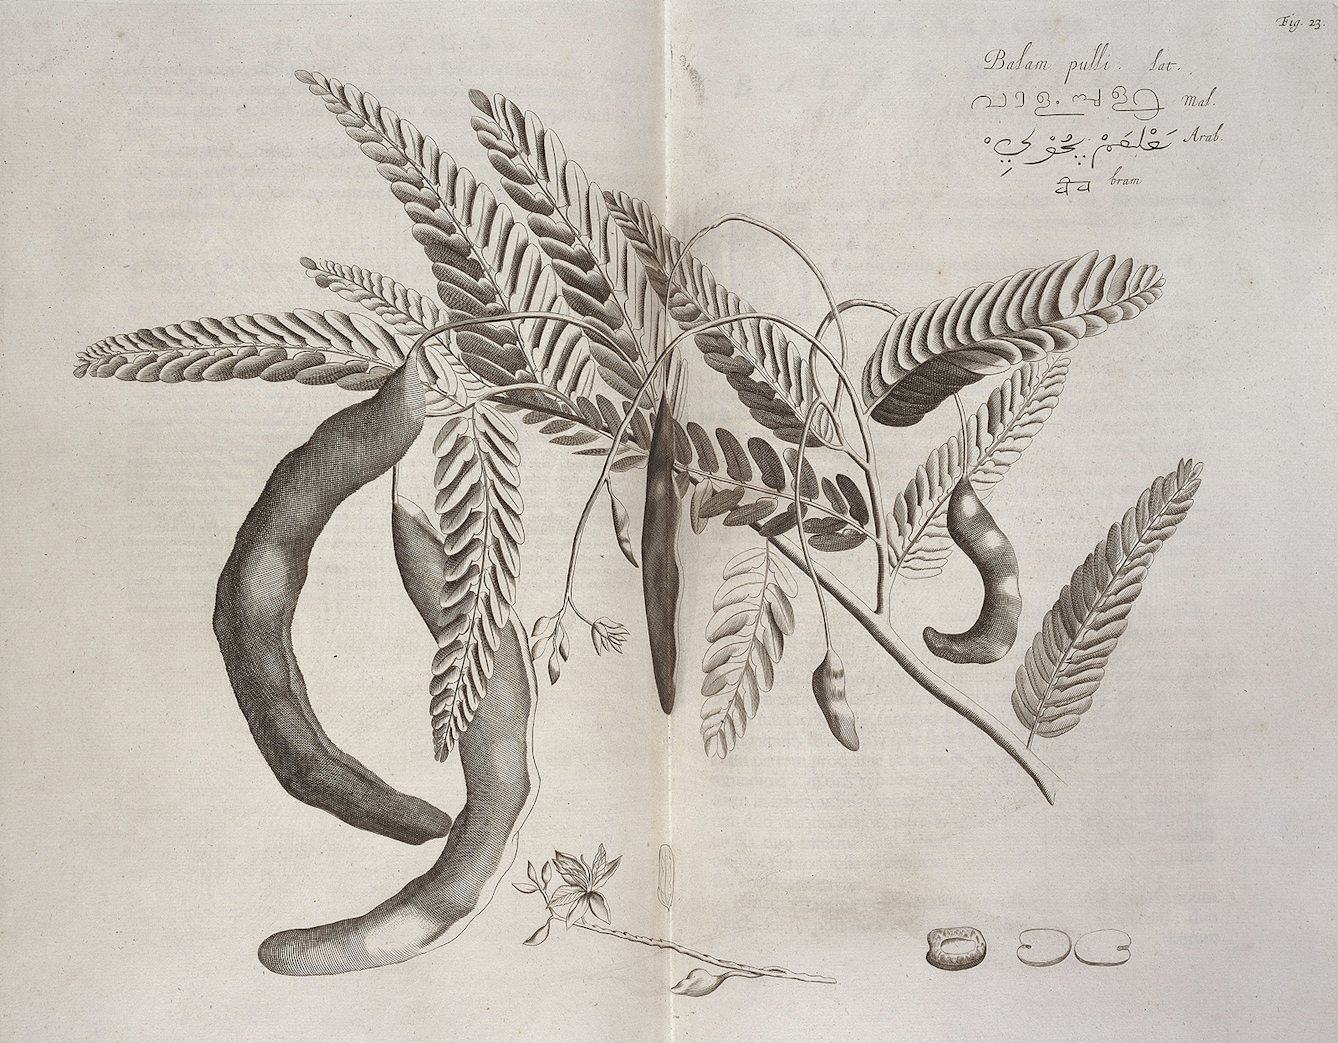 A black and white engraving of a branch with leaves and seed pods.